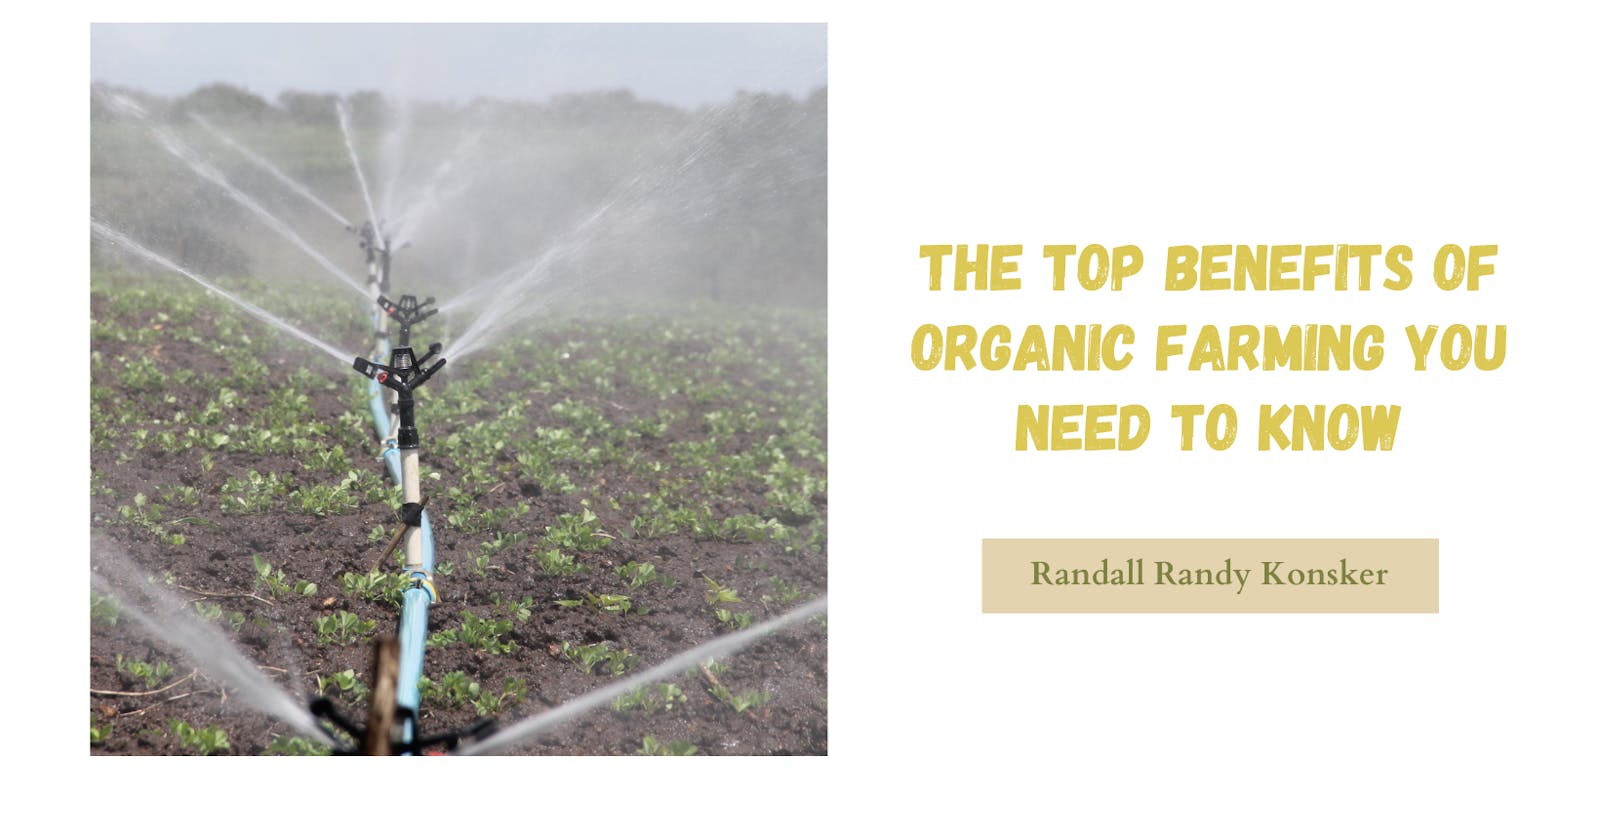 Randall Randy Konsker Guide The Top Benefits of Organic Farming You Need to Know